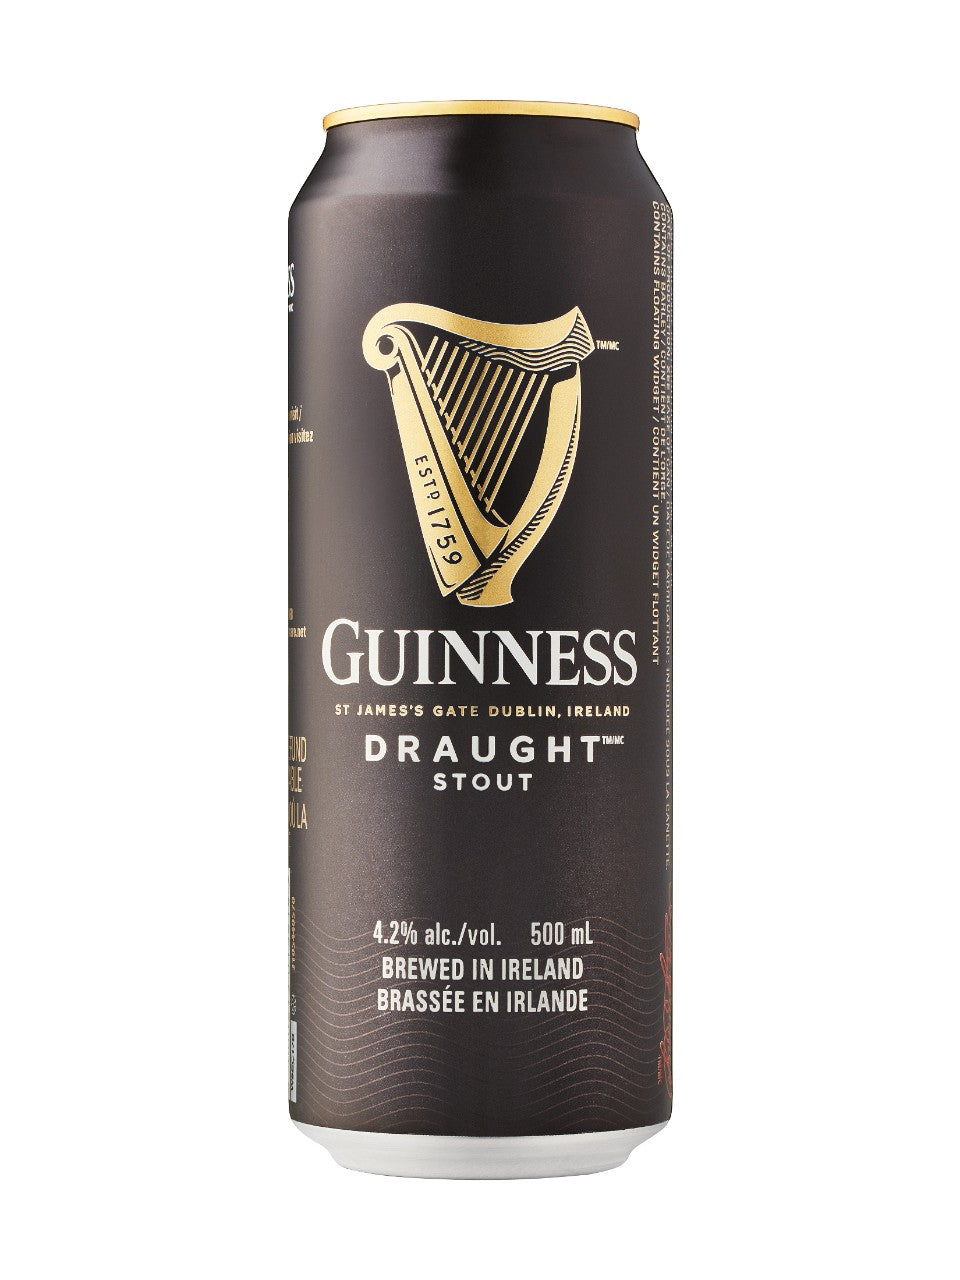 Guinness Draught 500 mL can